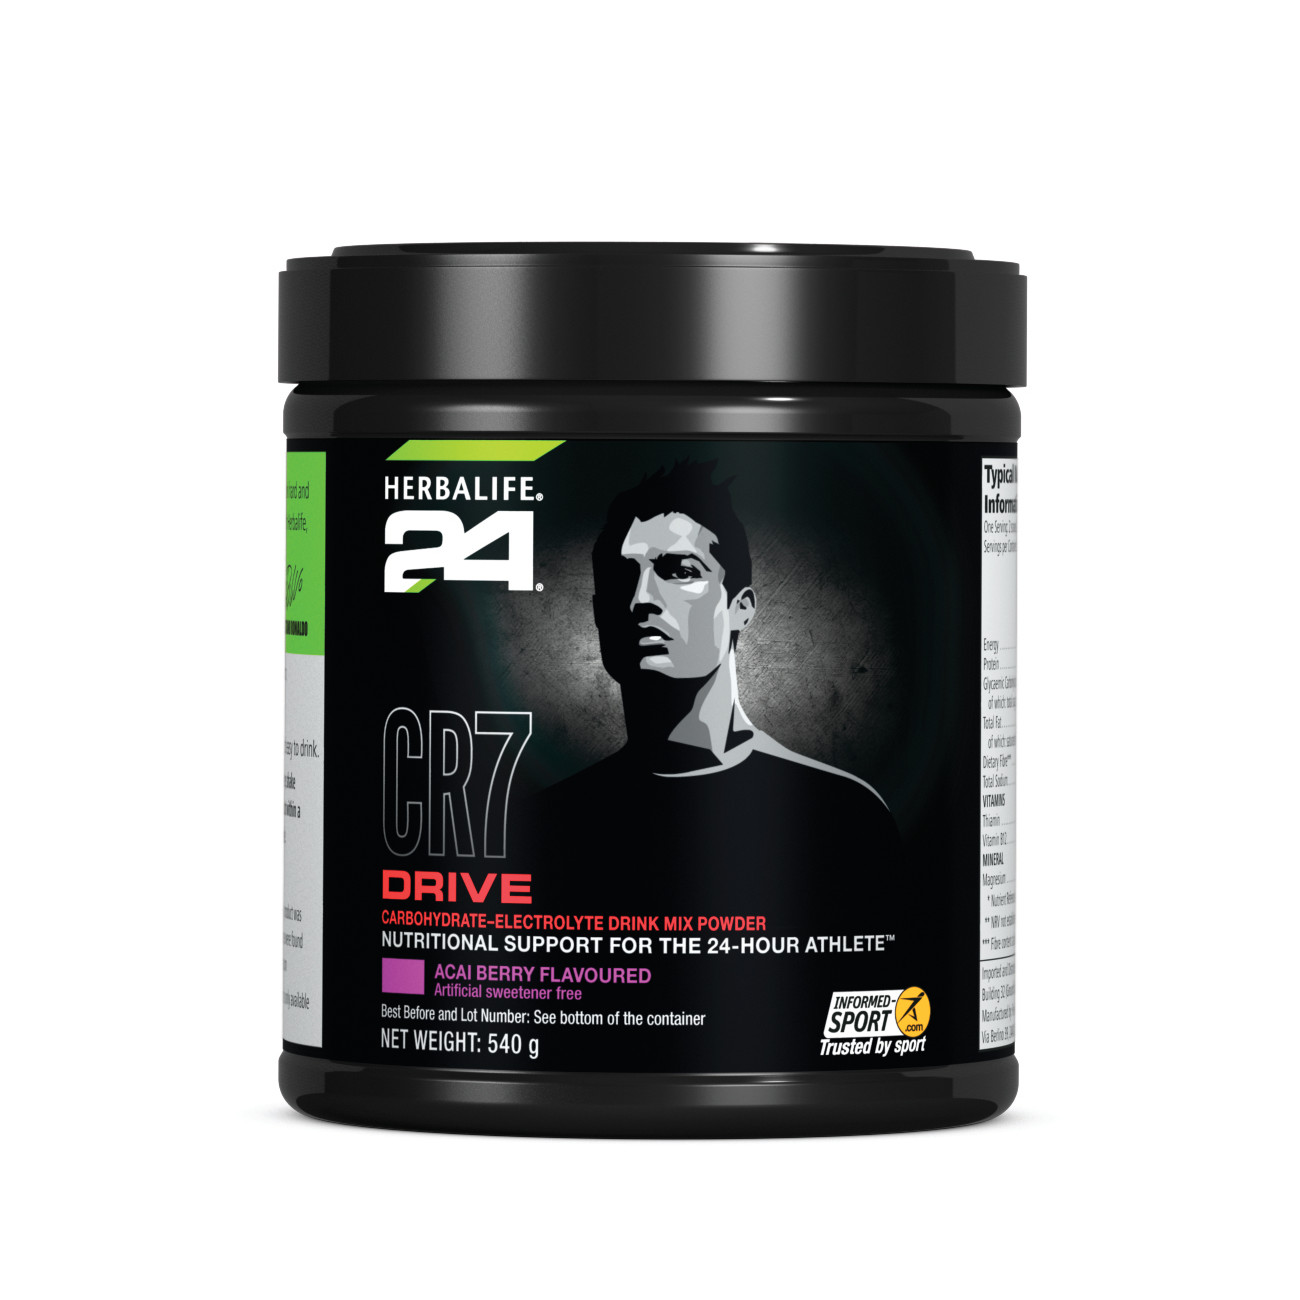 Herbalife24® CR7 Drive Sports Drink Acai Berry product shot.